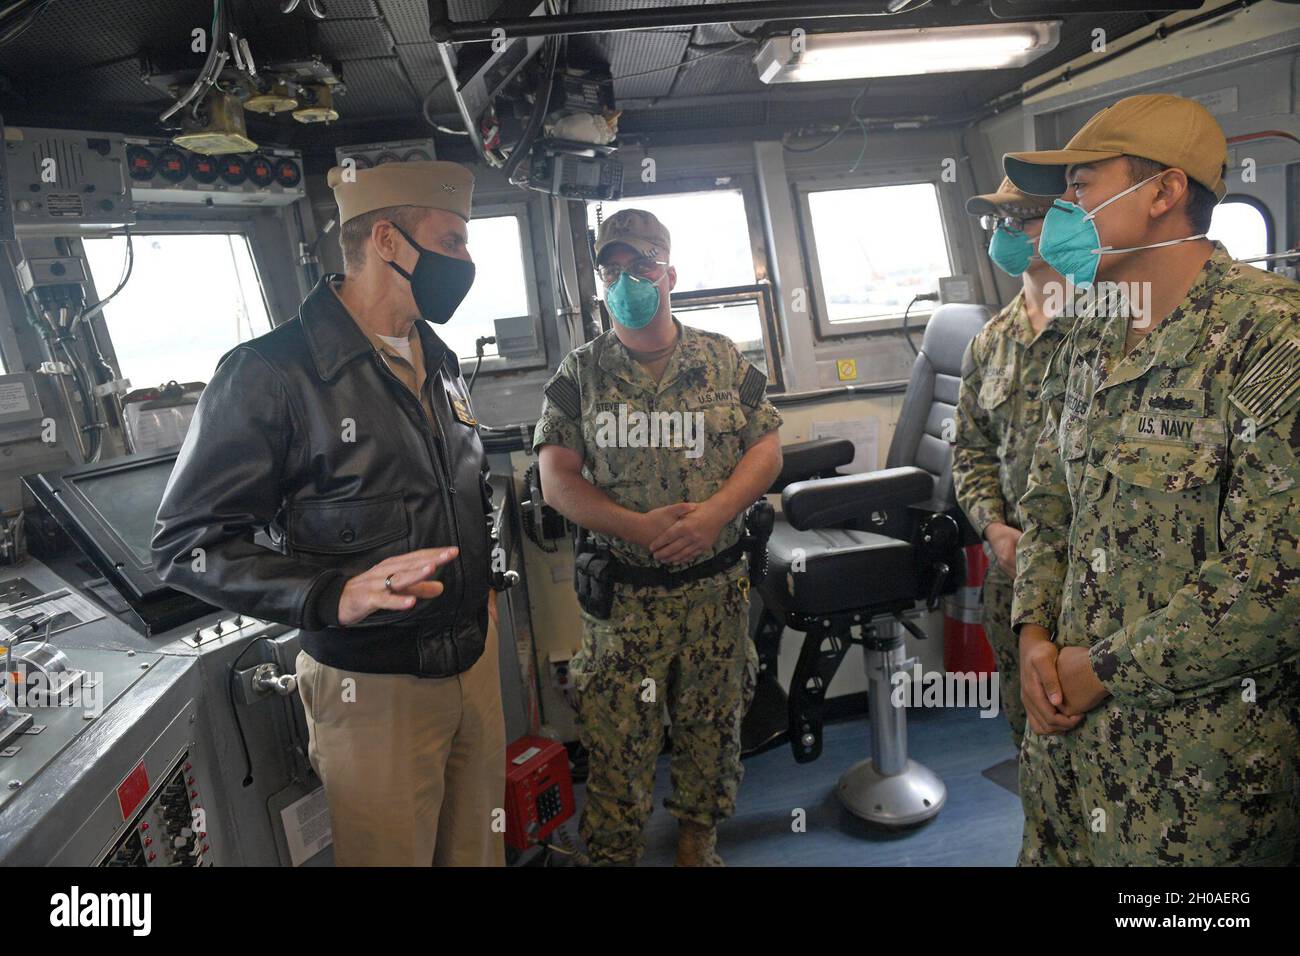 210108-N-AW702-001  MAYPORT, Fla. (January 8, 2021) – Rear Adm. Donald Gabrielson, Commander, U.S. Naval Forces Southern Command/U.S. 4th Fleet meets with Sailors during a visit to the Cyclone-class patrol ship USS Tornado (PC 14), Jan. 8, 2021.  U.S. Naval Forces Southern Command/U.S. 4th Fleet supports USSOUTHCOM joint and combined military operations by employing maritime forces in cooperative maritime security operations in order to maintain access, enhance interoperability and build enduring partnerships that foster regional security and promote peace, stability and prosperity in the in t Stock Photo